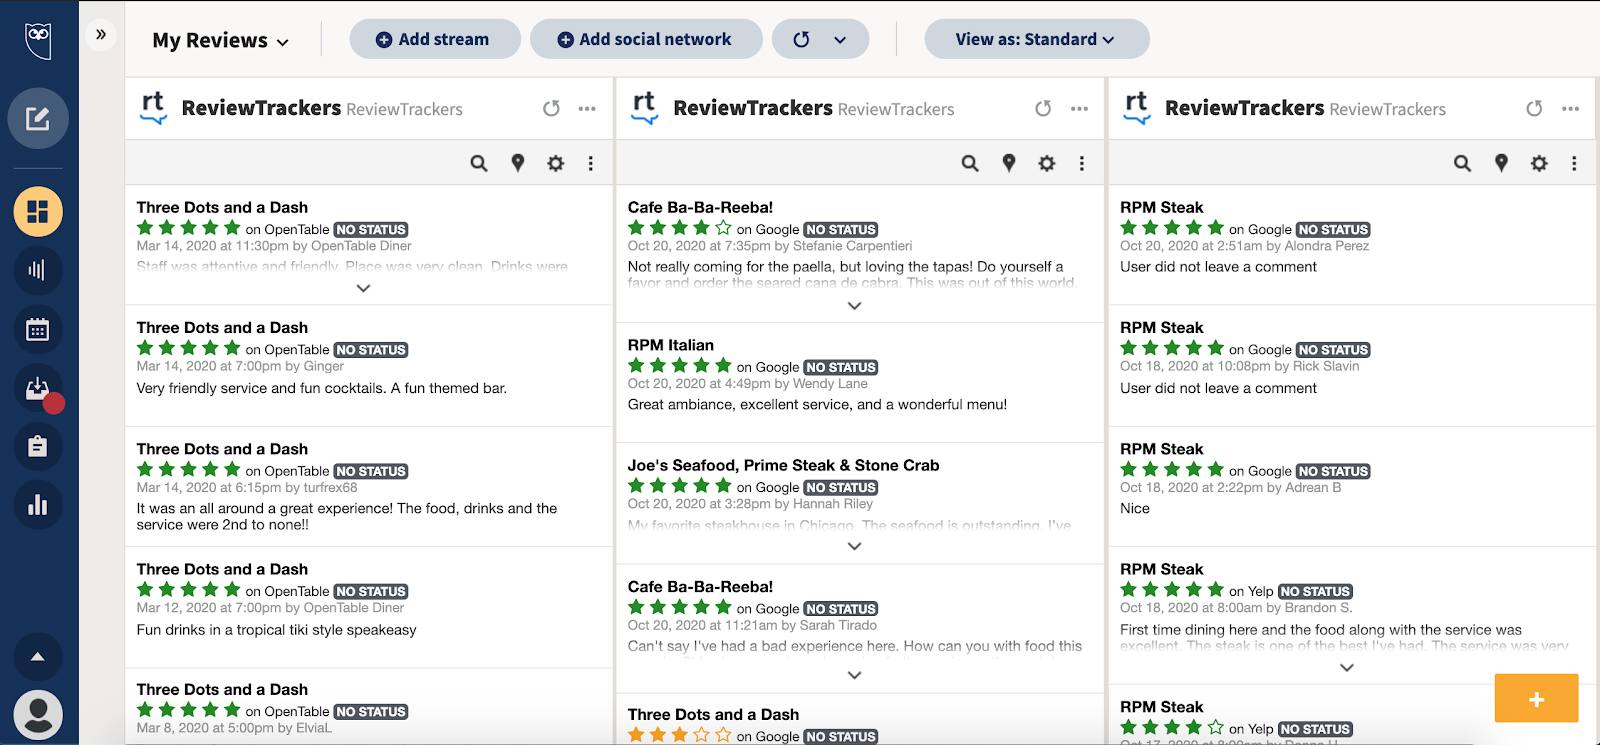 ReviewTrackers Software - The ReviewTrackers & Hootsuite integration allows you to reap the benefits of pairing social media and reviews to drive engagement and increase customer acquisition and conversions.